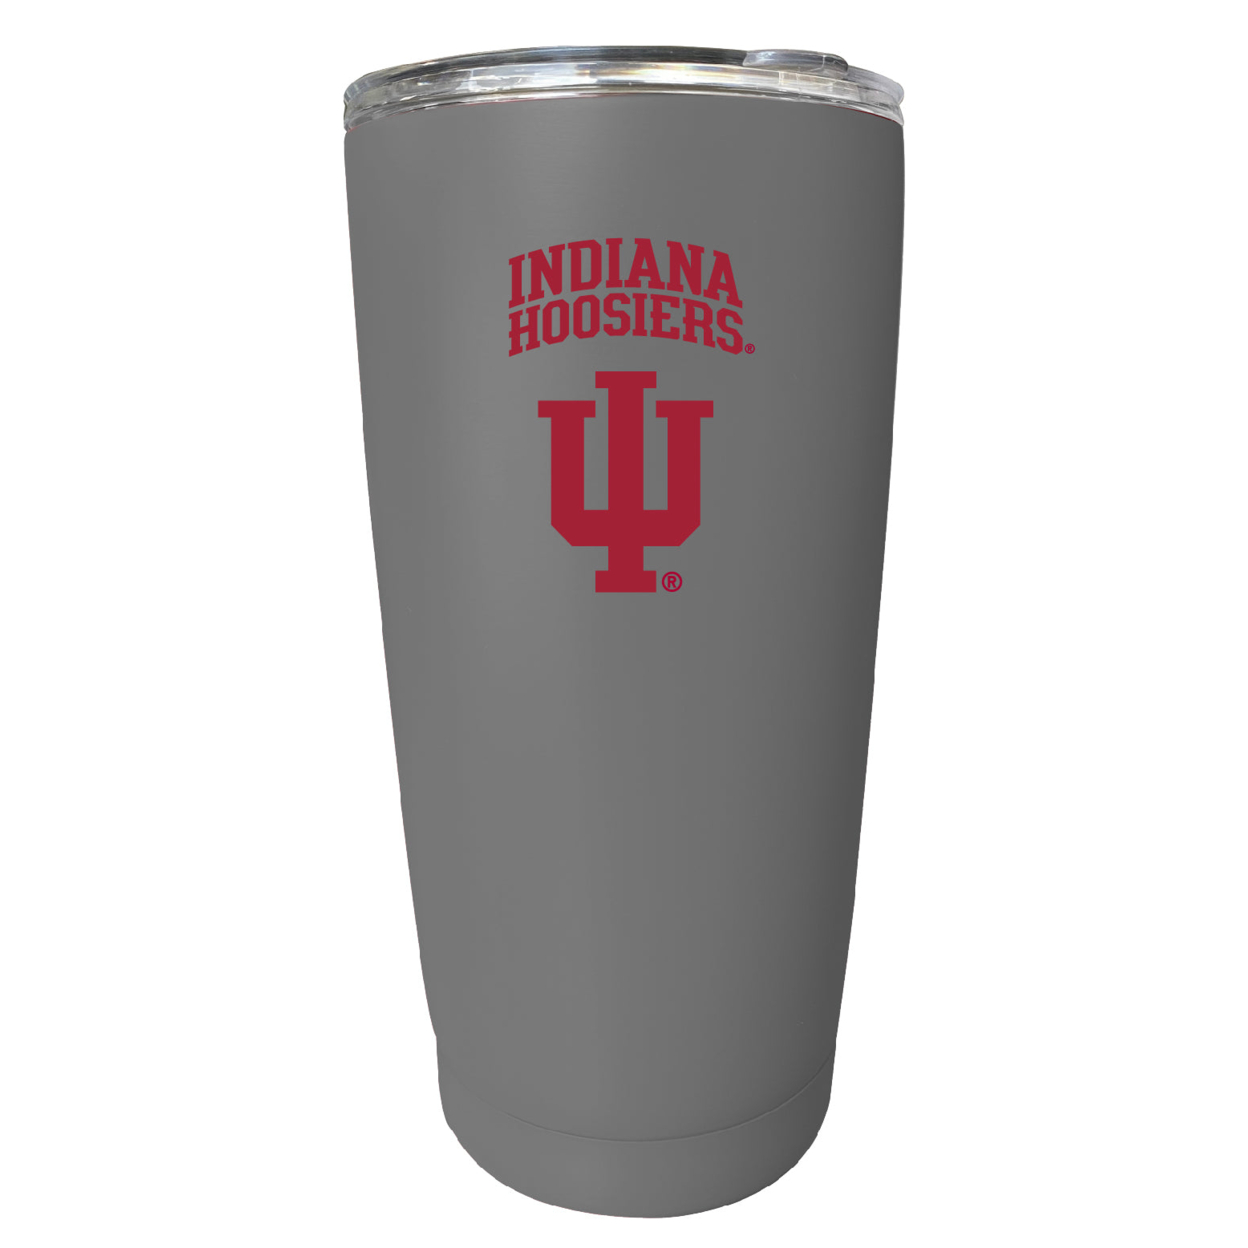 Indiana Hoosiers 16 Oz Stainless Steel Insulated Tumbler - Gray